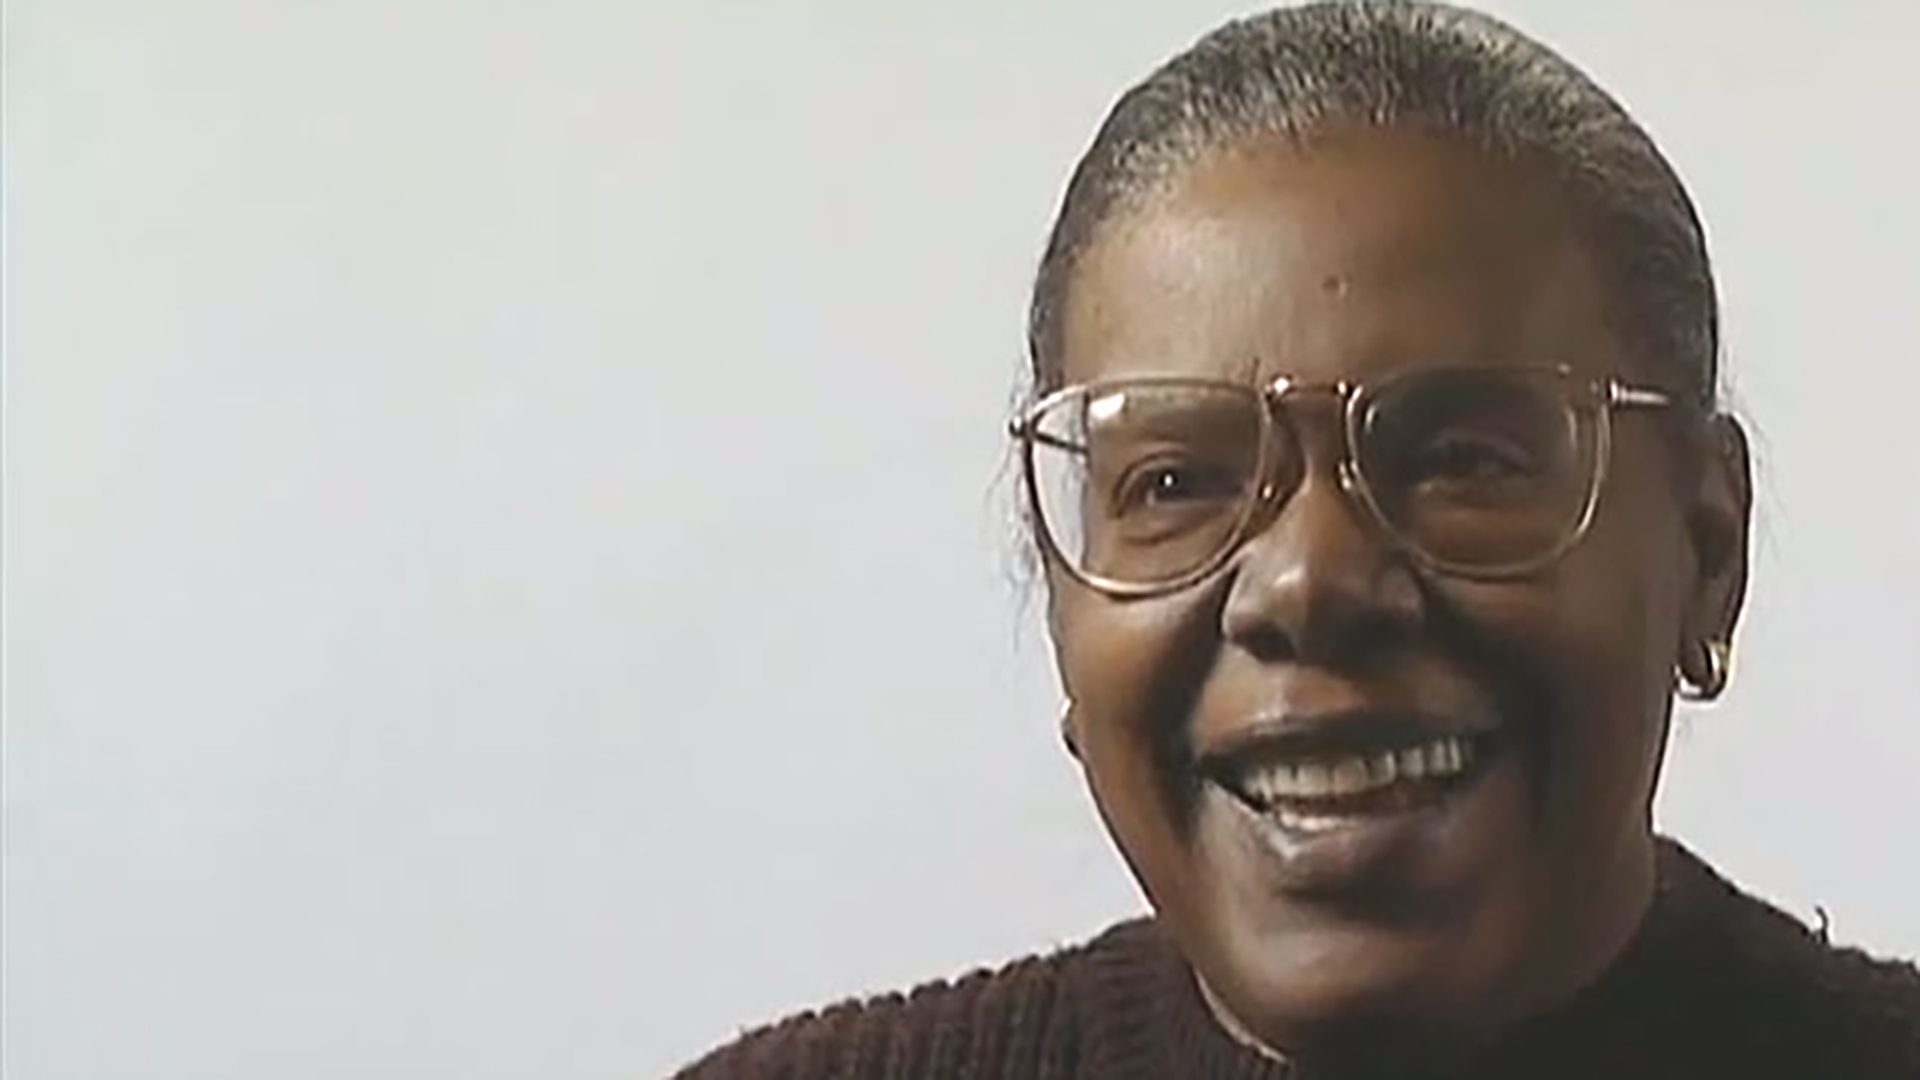 A smiling middle-aged woman wearing glasses and a brown sweater is interviewed against a white background.